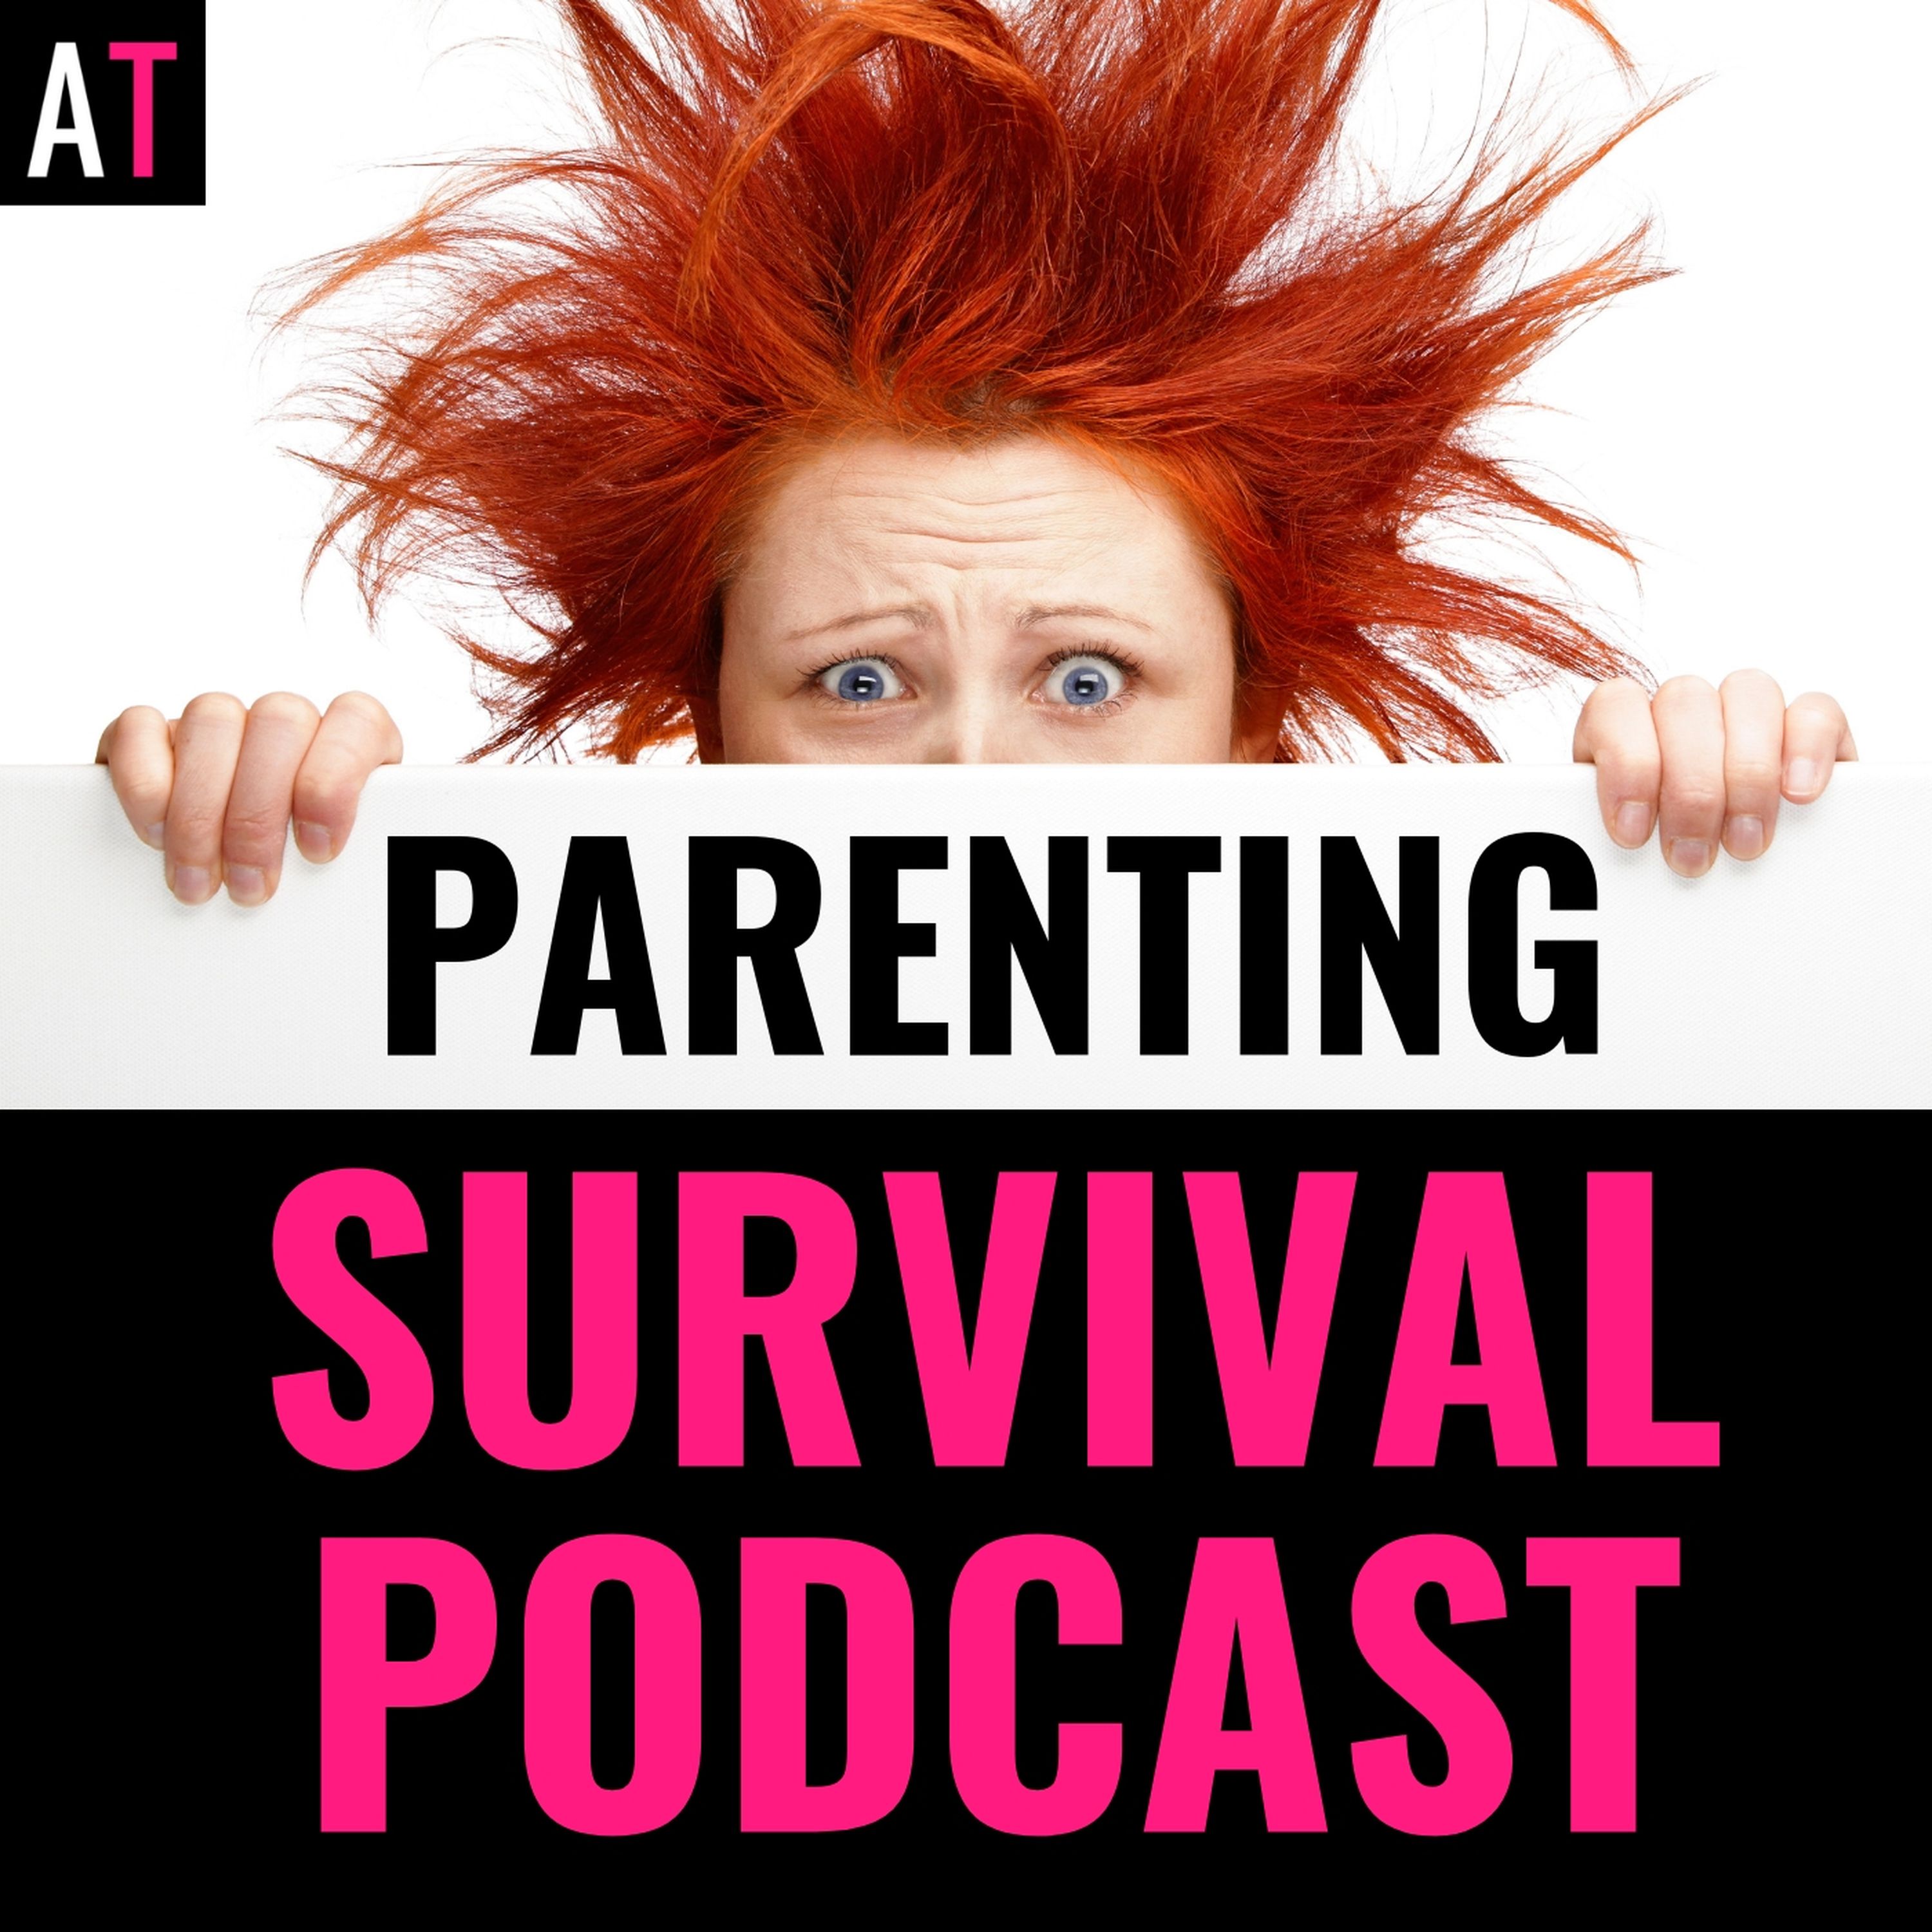 PSP 166: Moving our Kids with Anxiety or OCD from Dependency to Resiliency